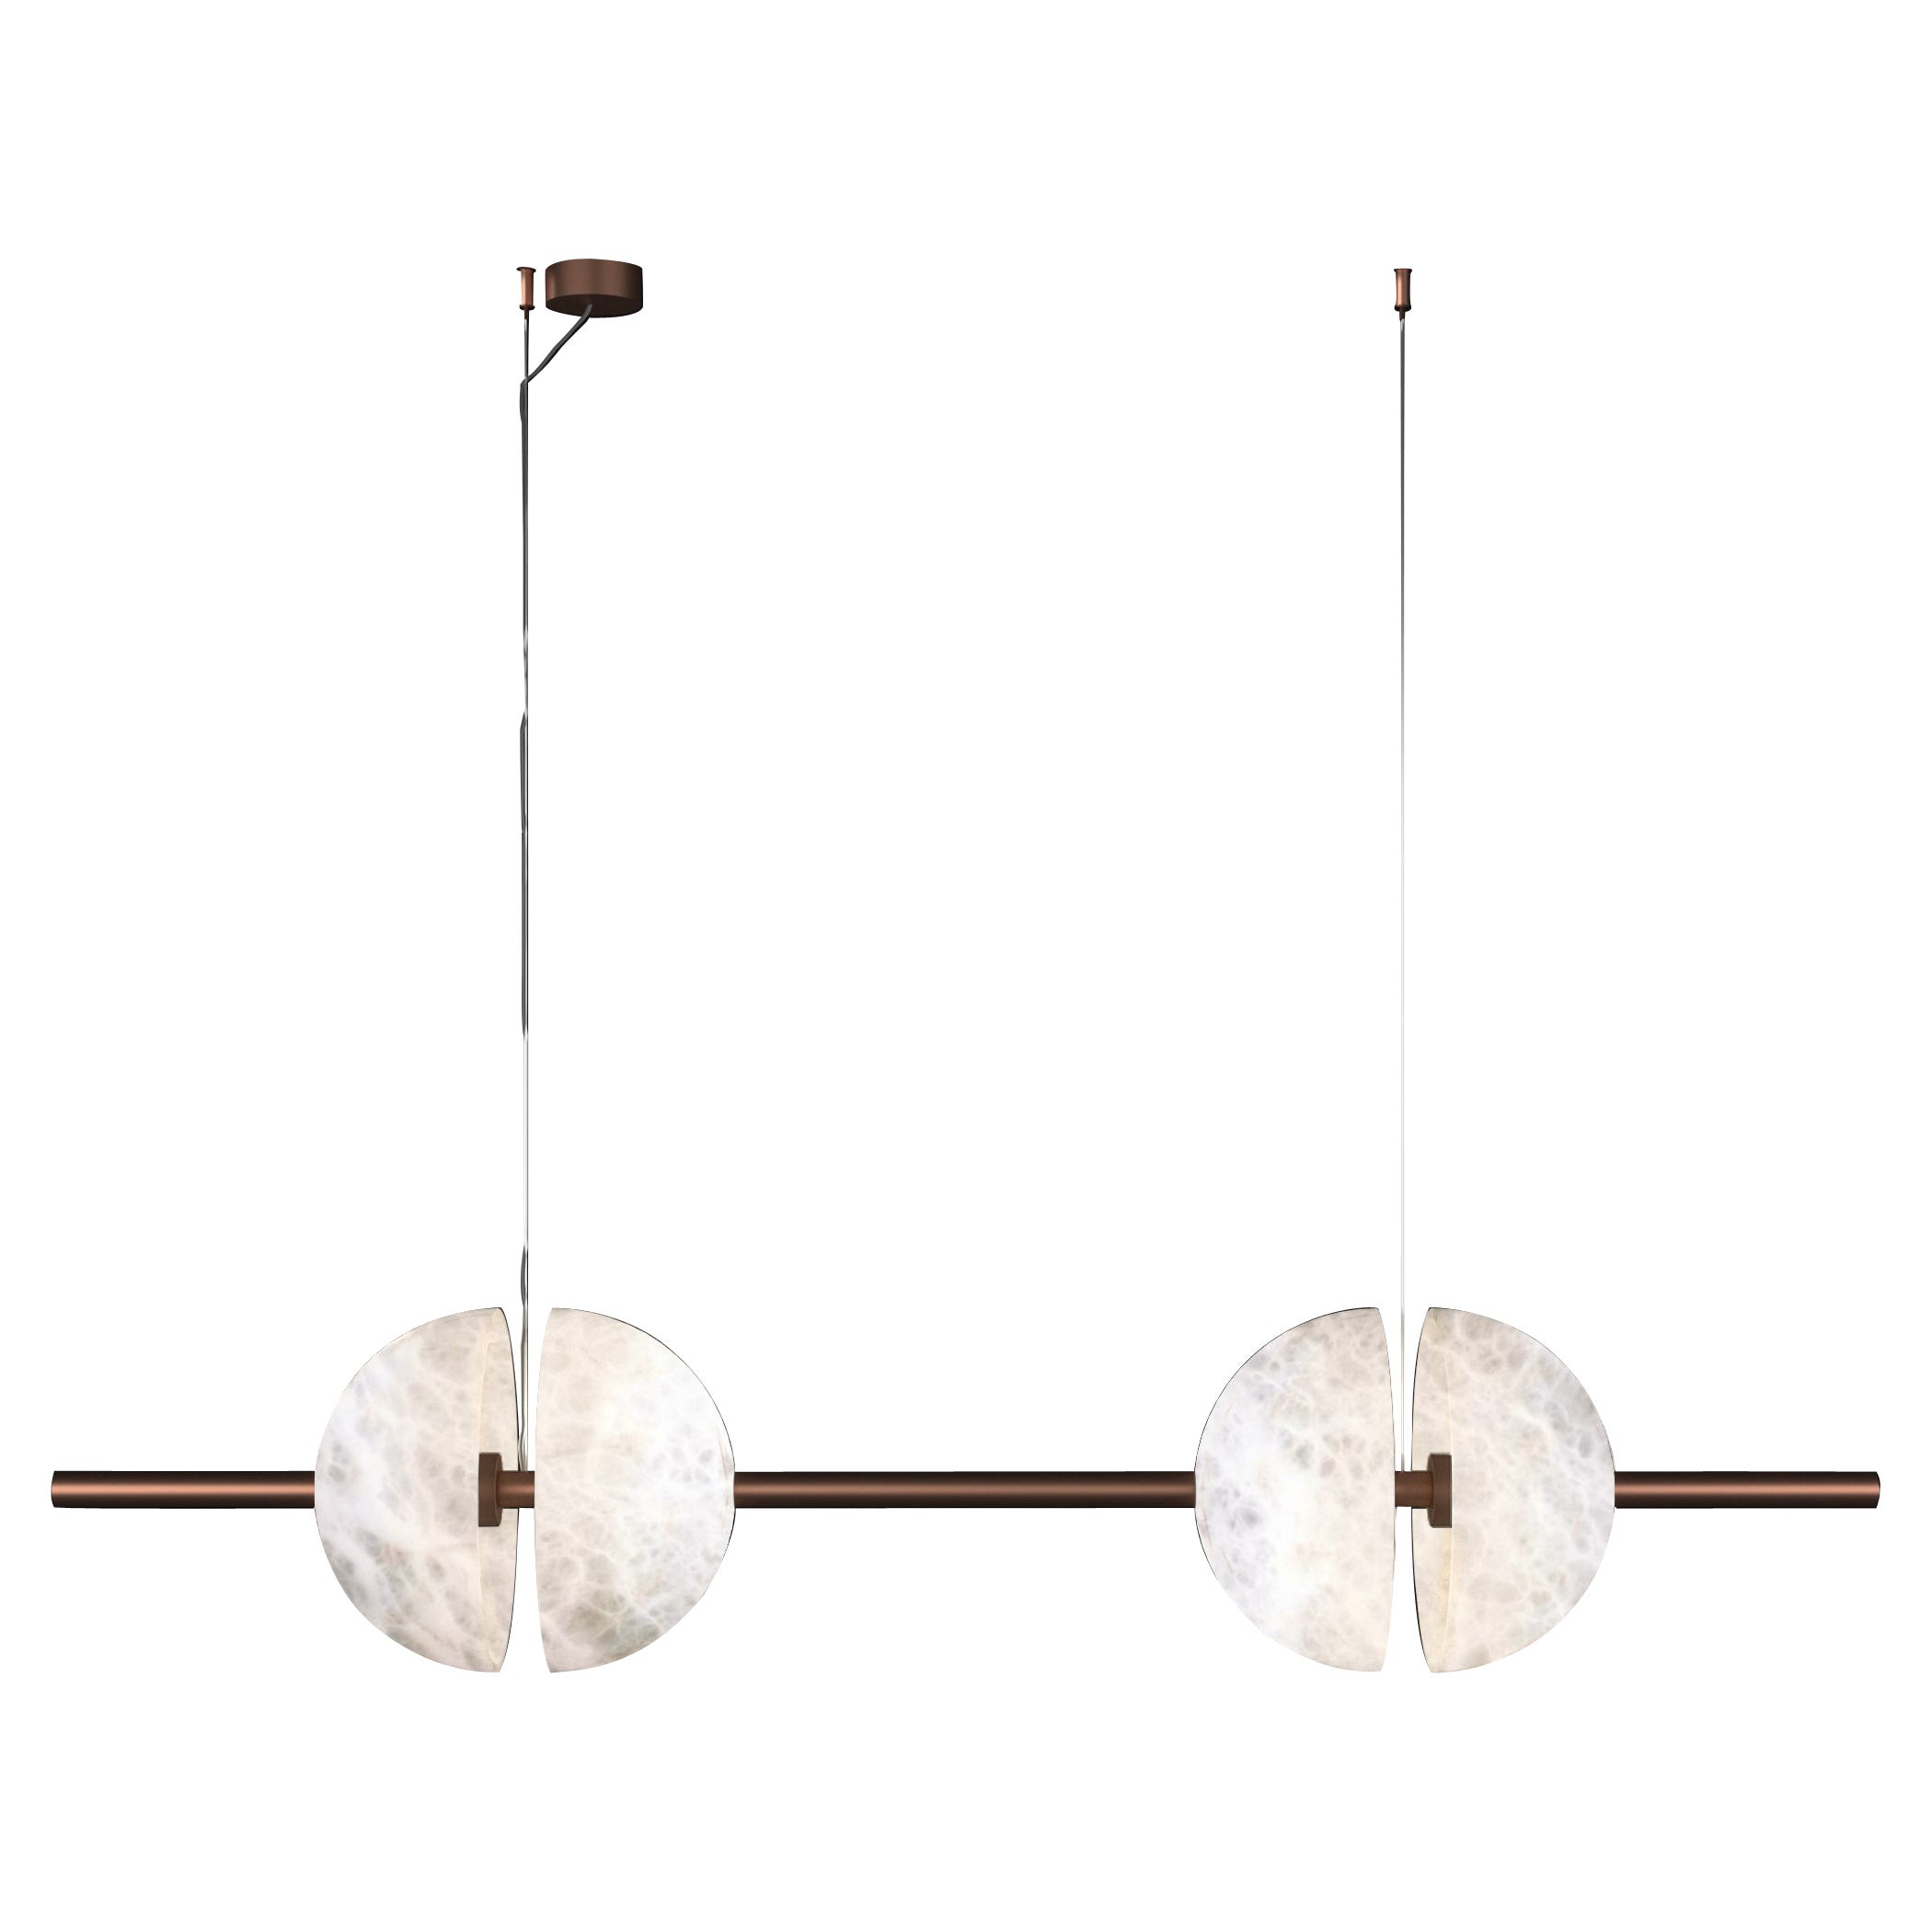 Ermes Copper And Alabaster Pendant Light 1 by Alabastro Italiano For Sale